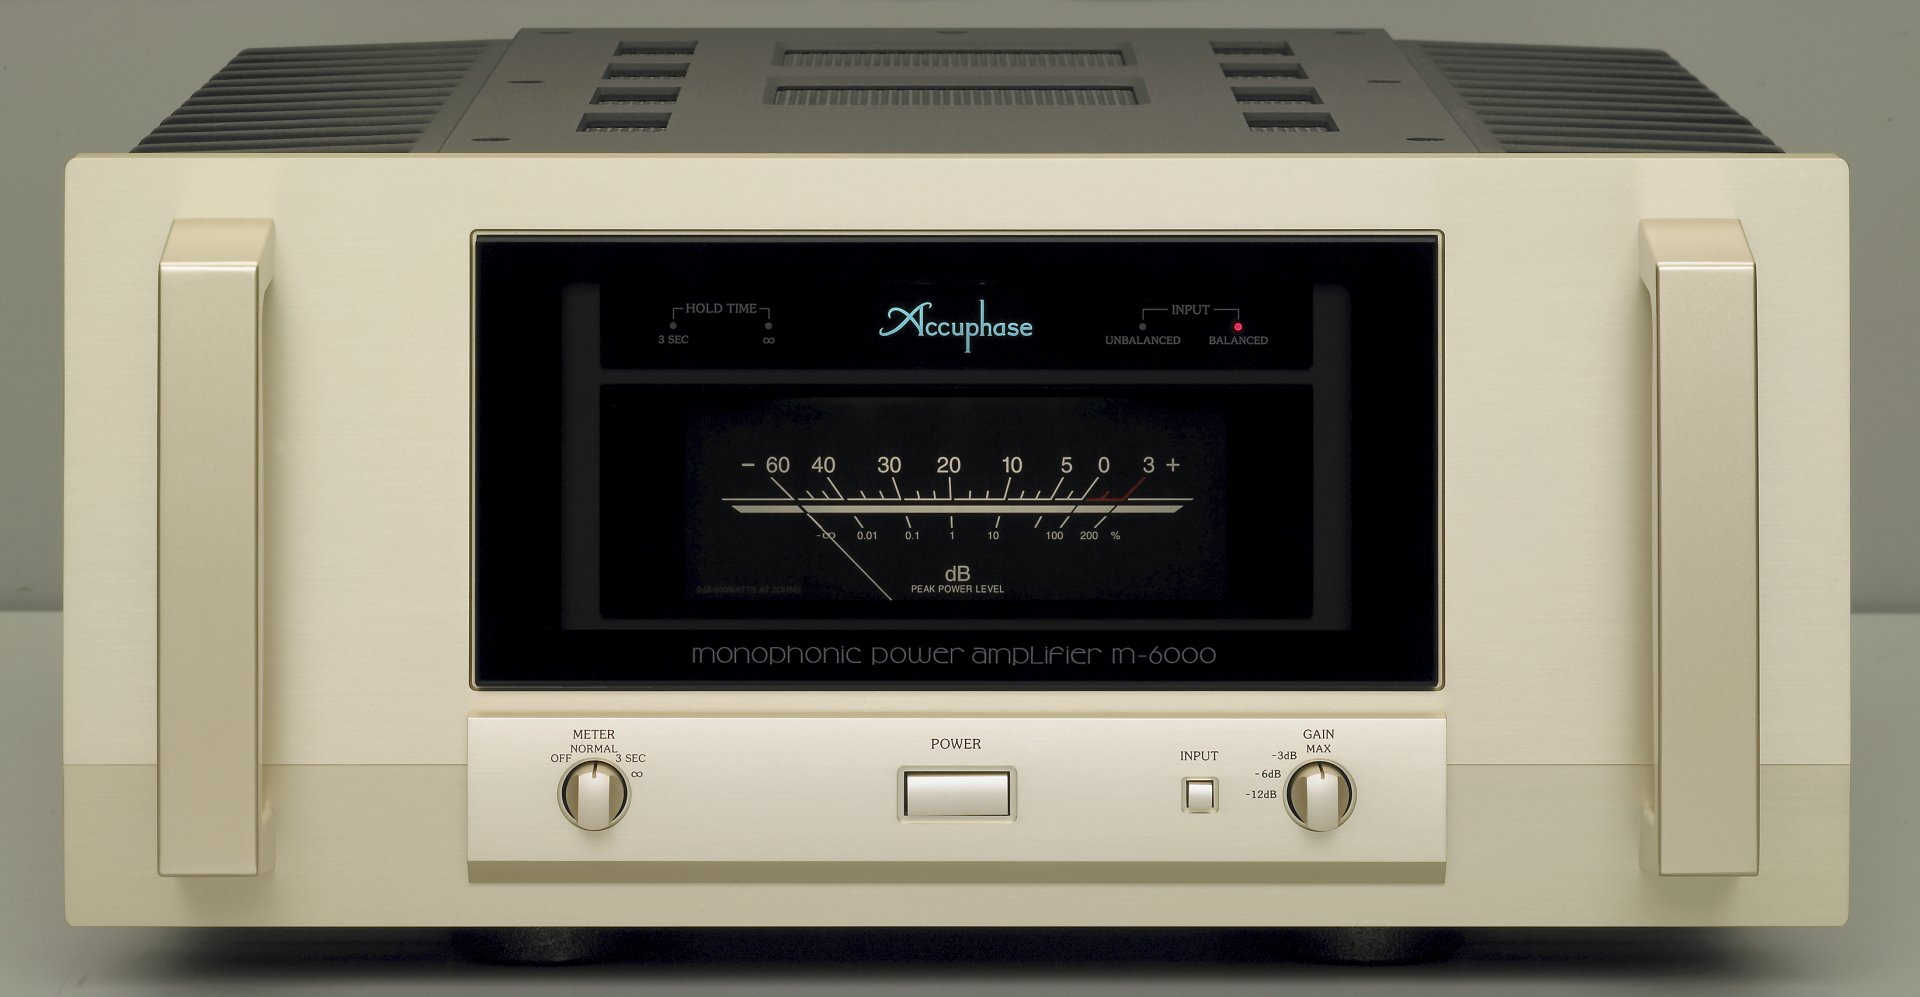 Accuphase アキュフェーズ フラグシップパワーアンプ M-6000 発売 